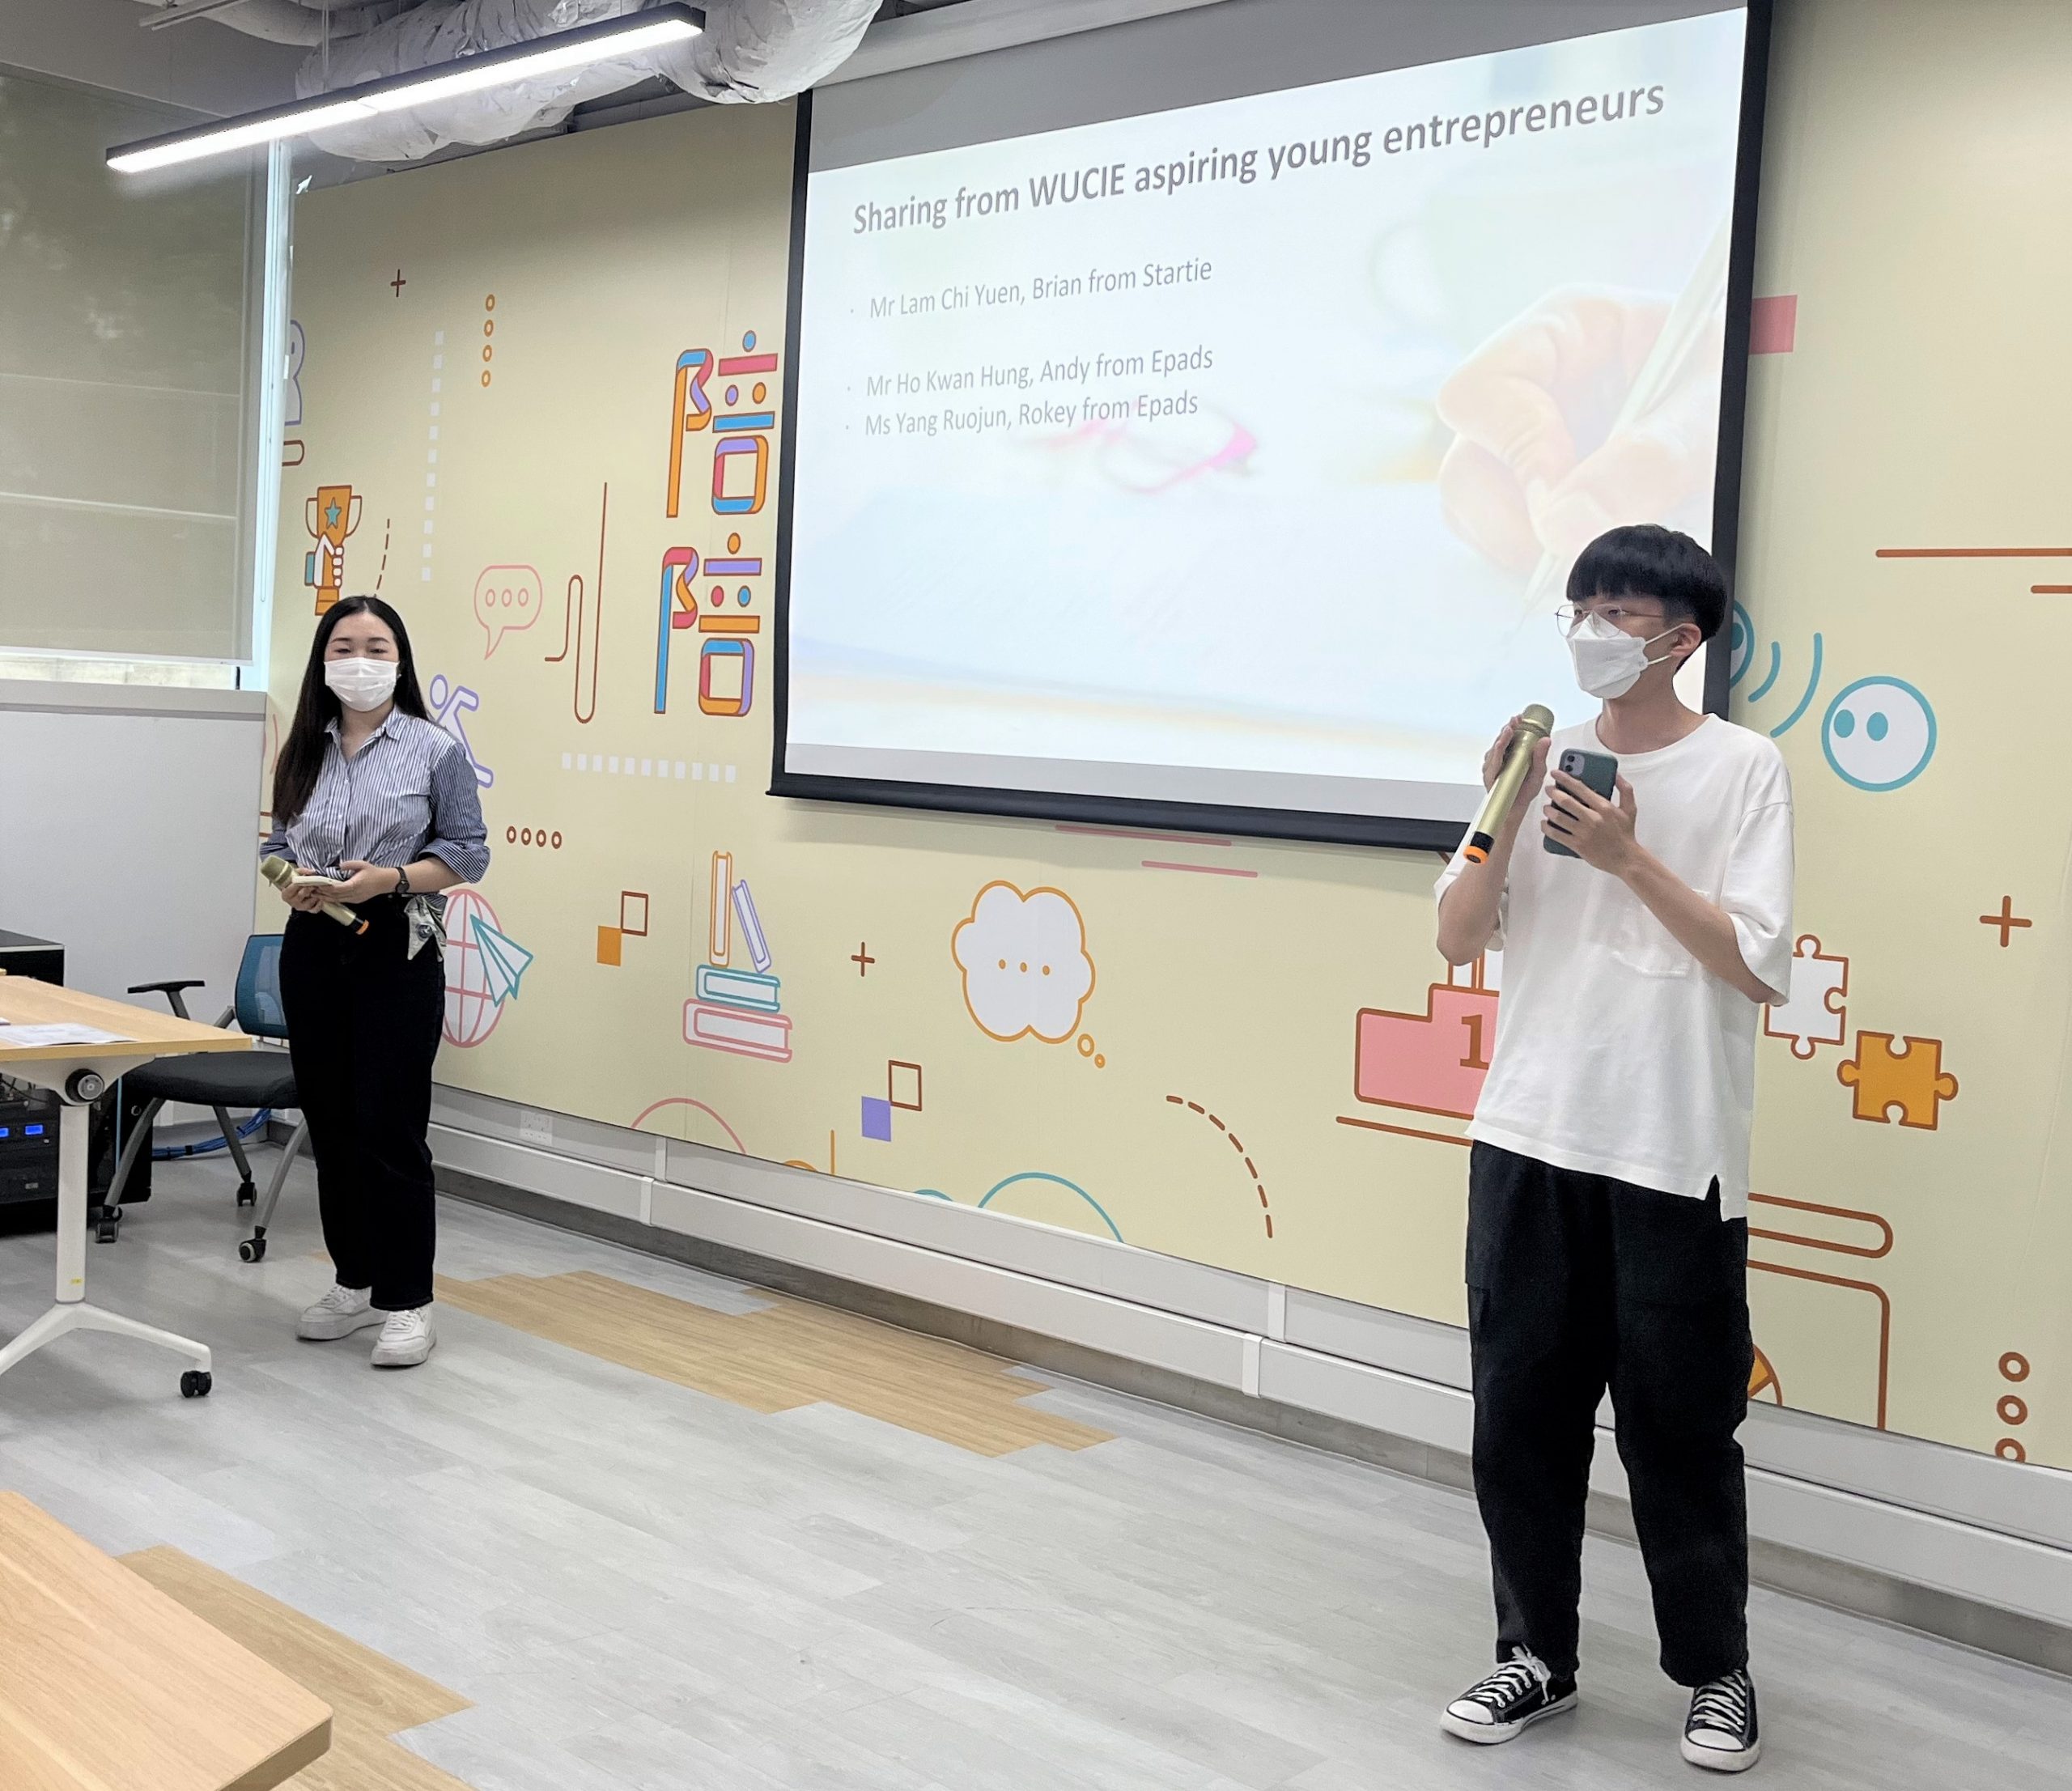 Mr Andy Ho and Ms Rokey Yang shared what situation they are facing  to start a new business